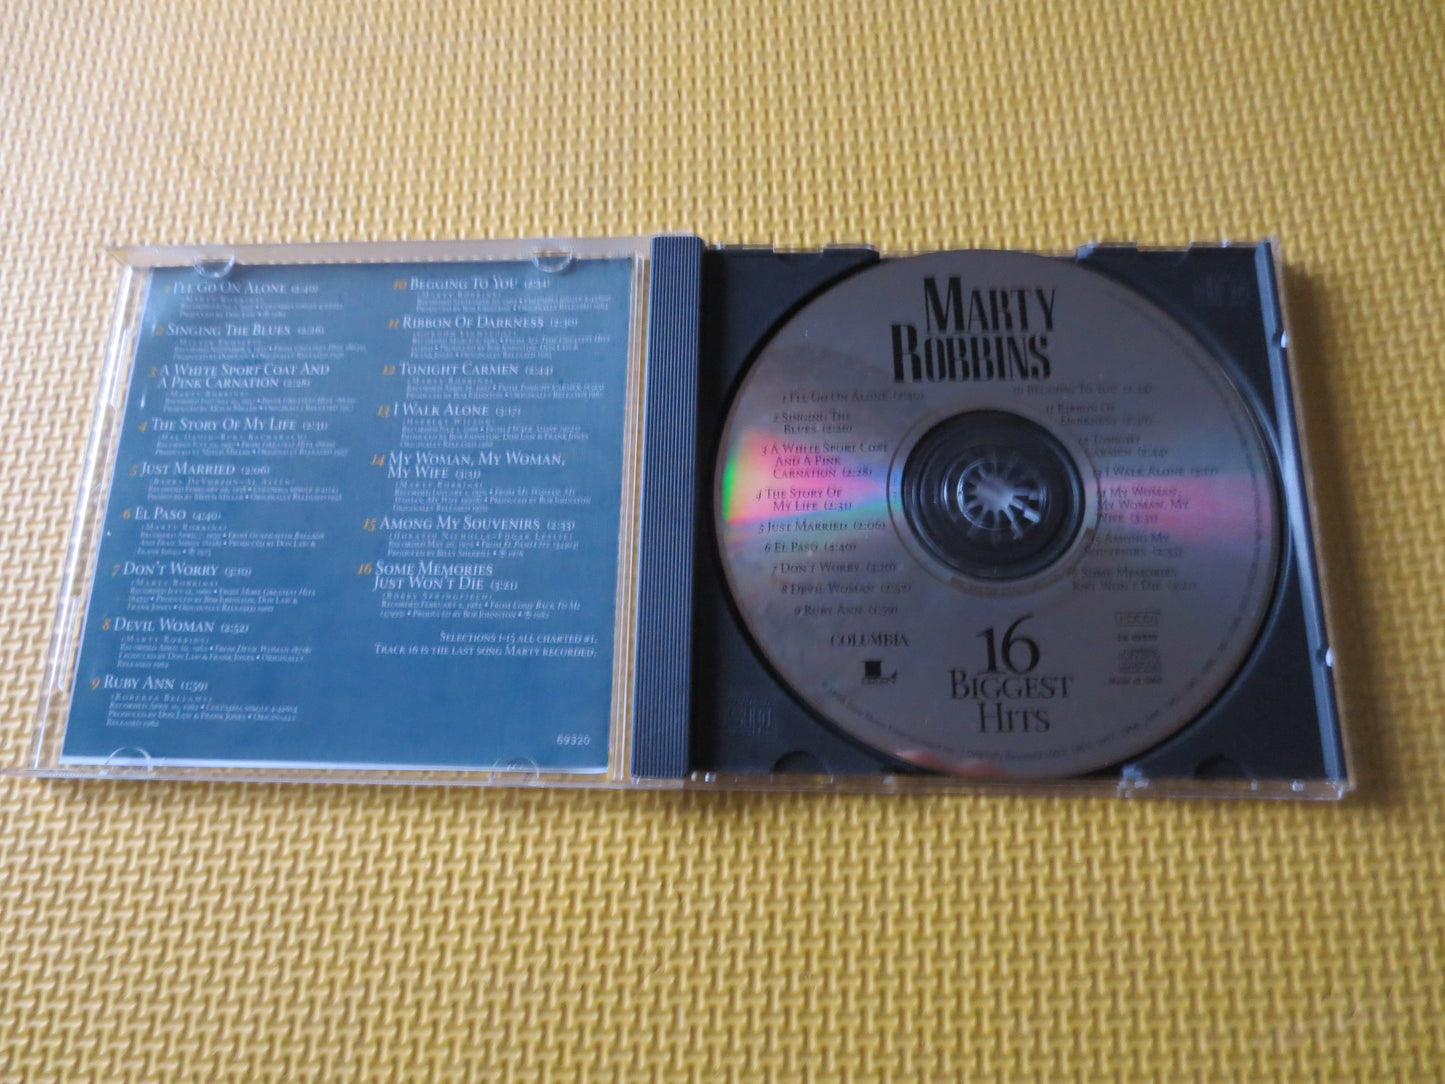 MARTY ROBBINS, 16 BIGGEST Hits, Marty Robbins Album, Country Cd, Classic Country Cd, Music Cd, Cd Music, Cds, 1998 Compact Disc